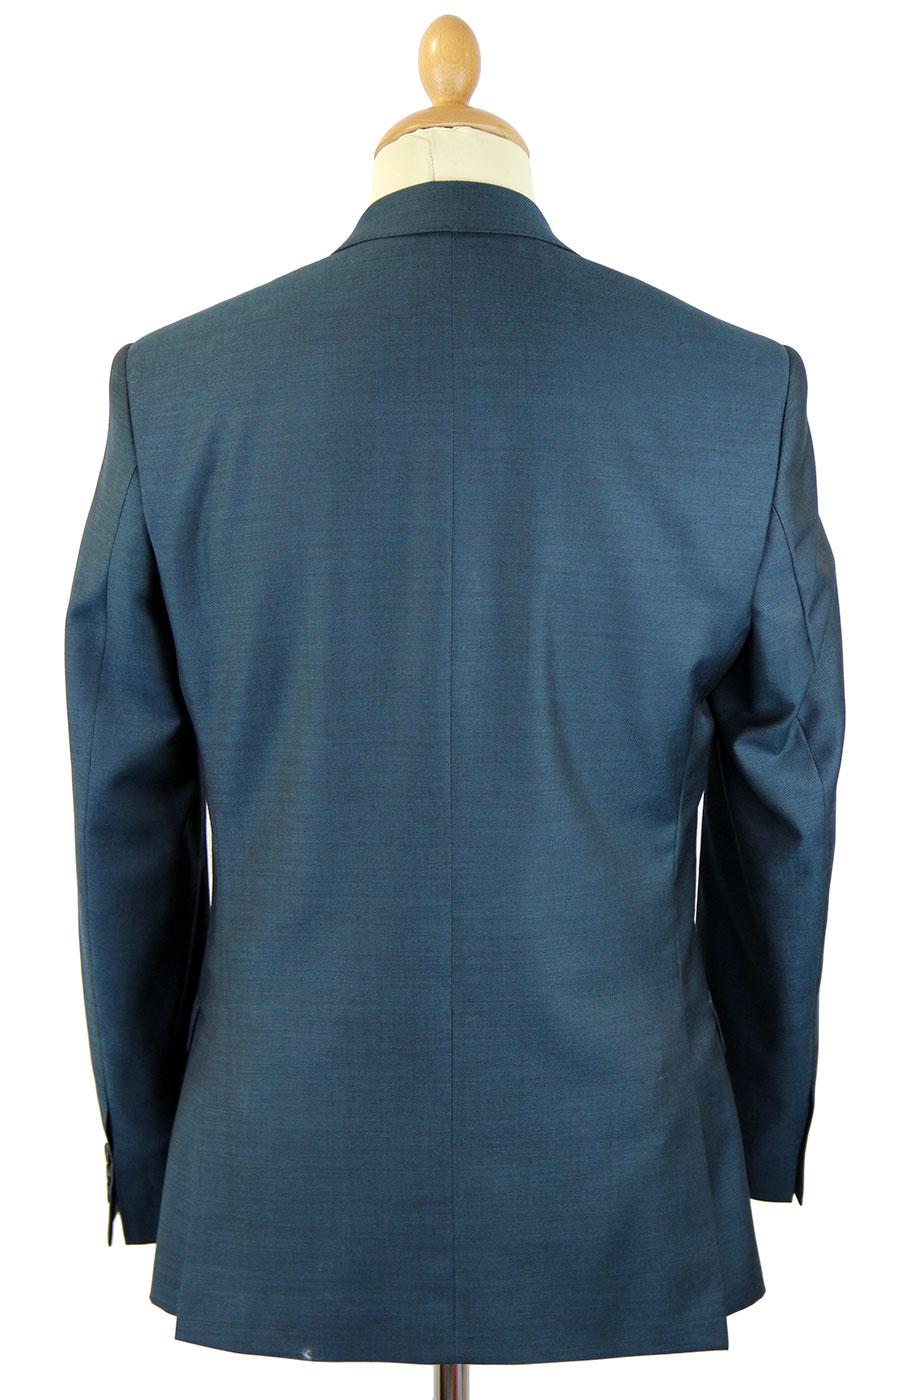 Mens Retro 60s style slim fit Mod Suit in Teal Tonic.